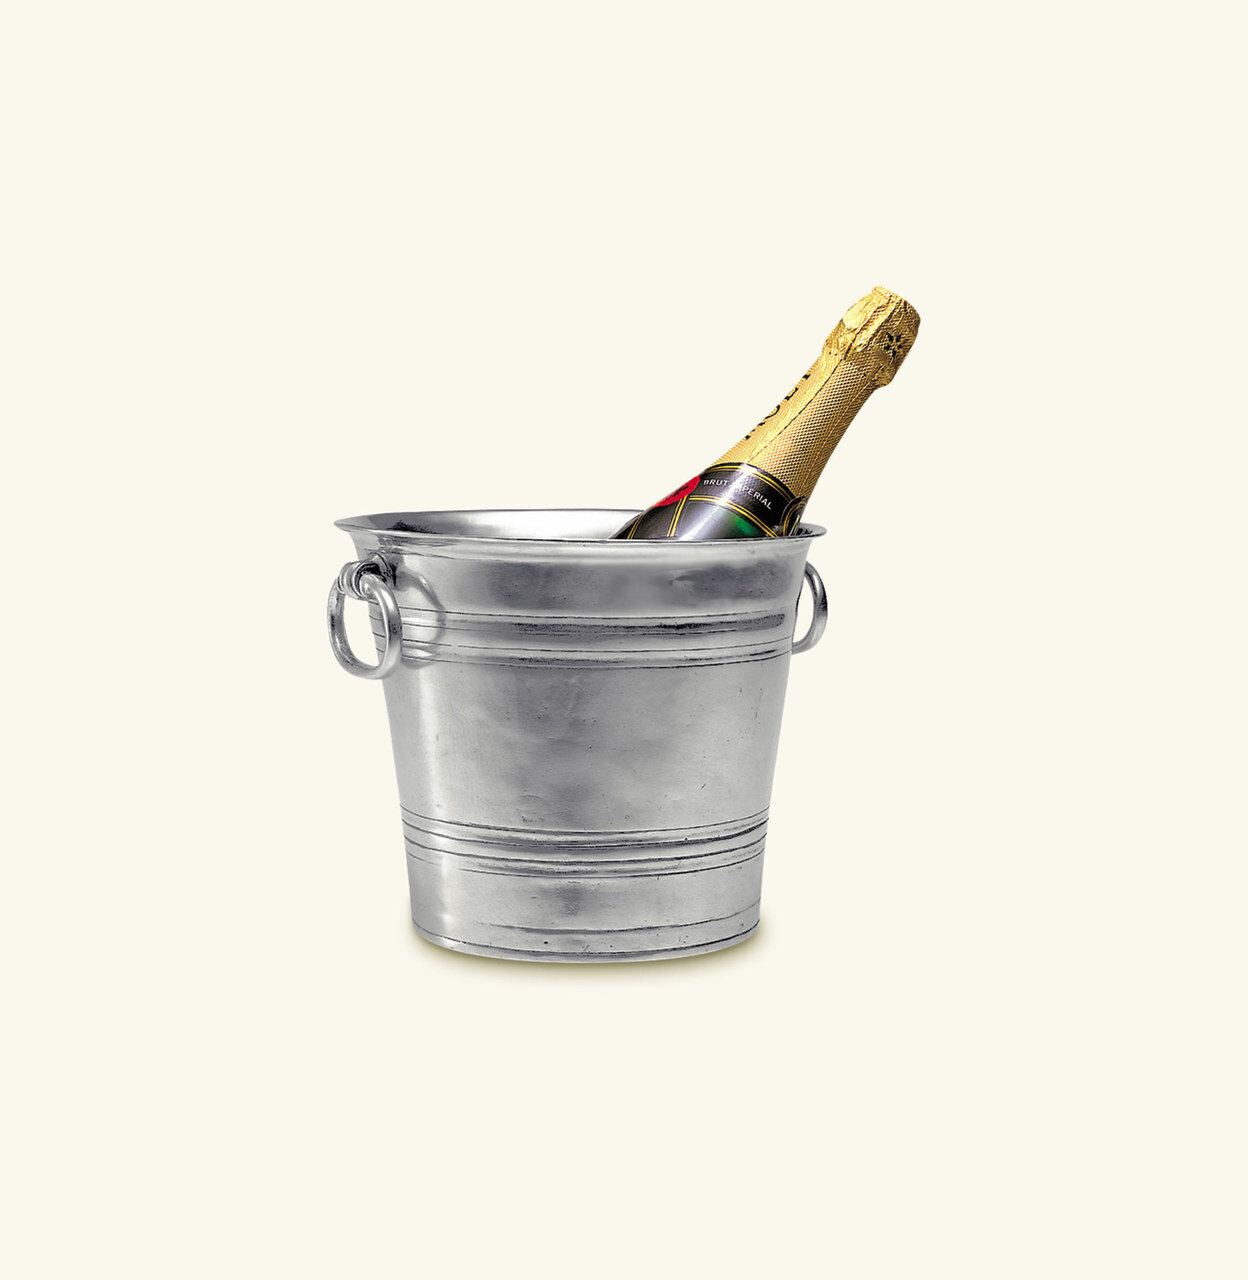 Match Pewter Champagne Bucket 639